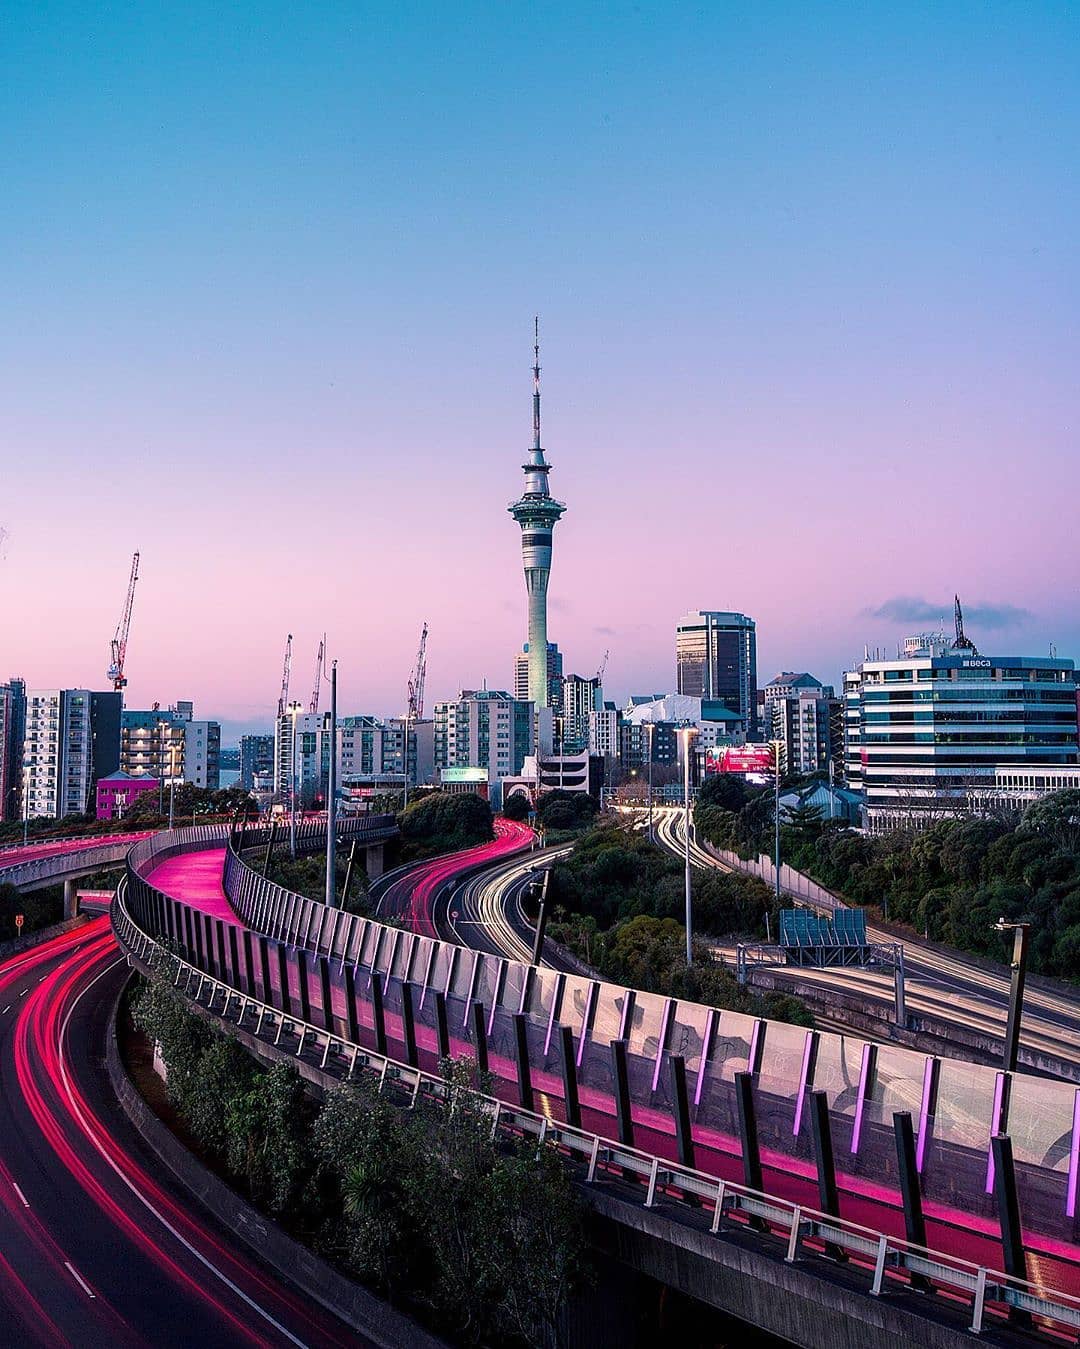 Tall buildings in Auckland, NZ with a purple sunset. Photo by Instagram user @vhthomas